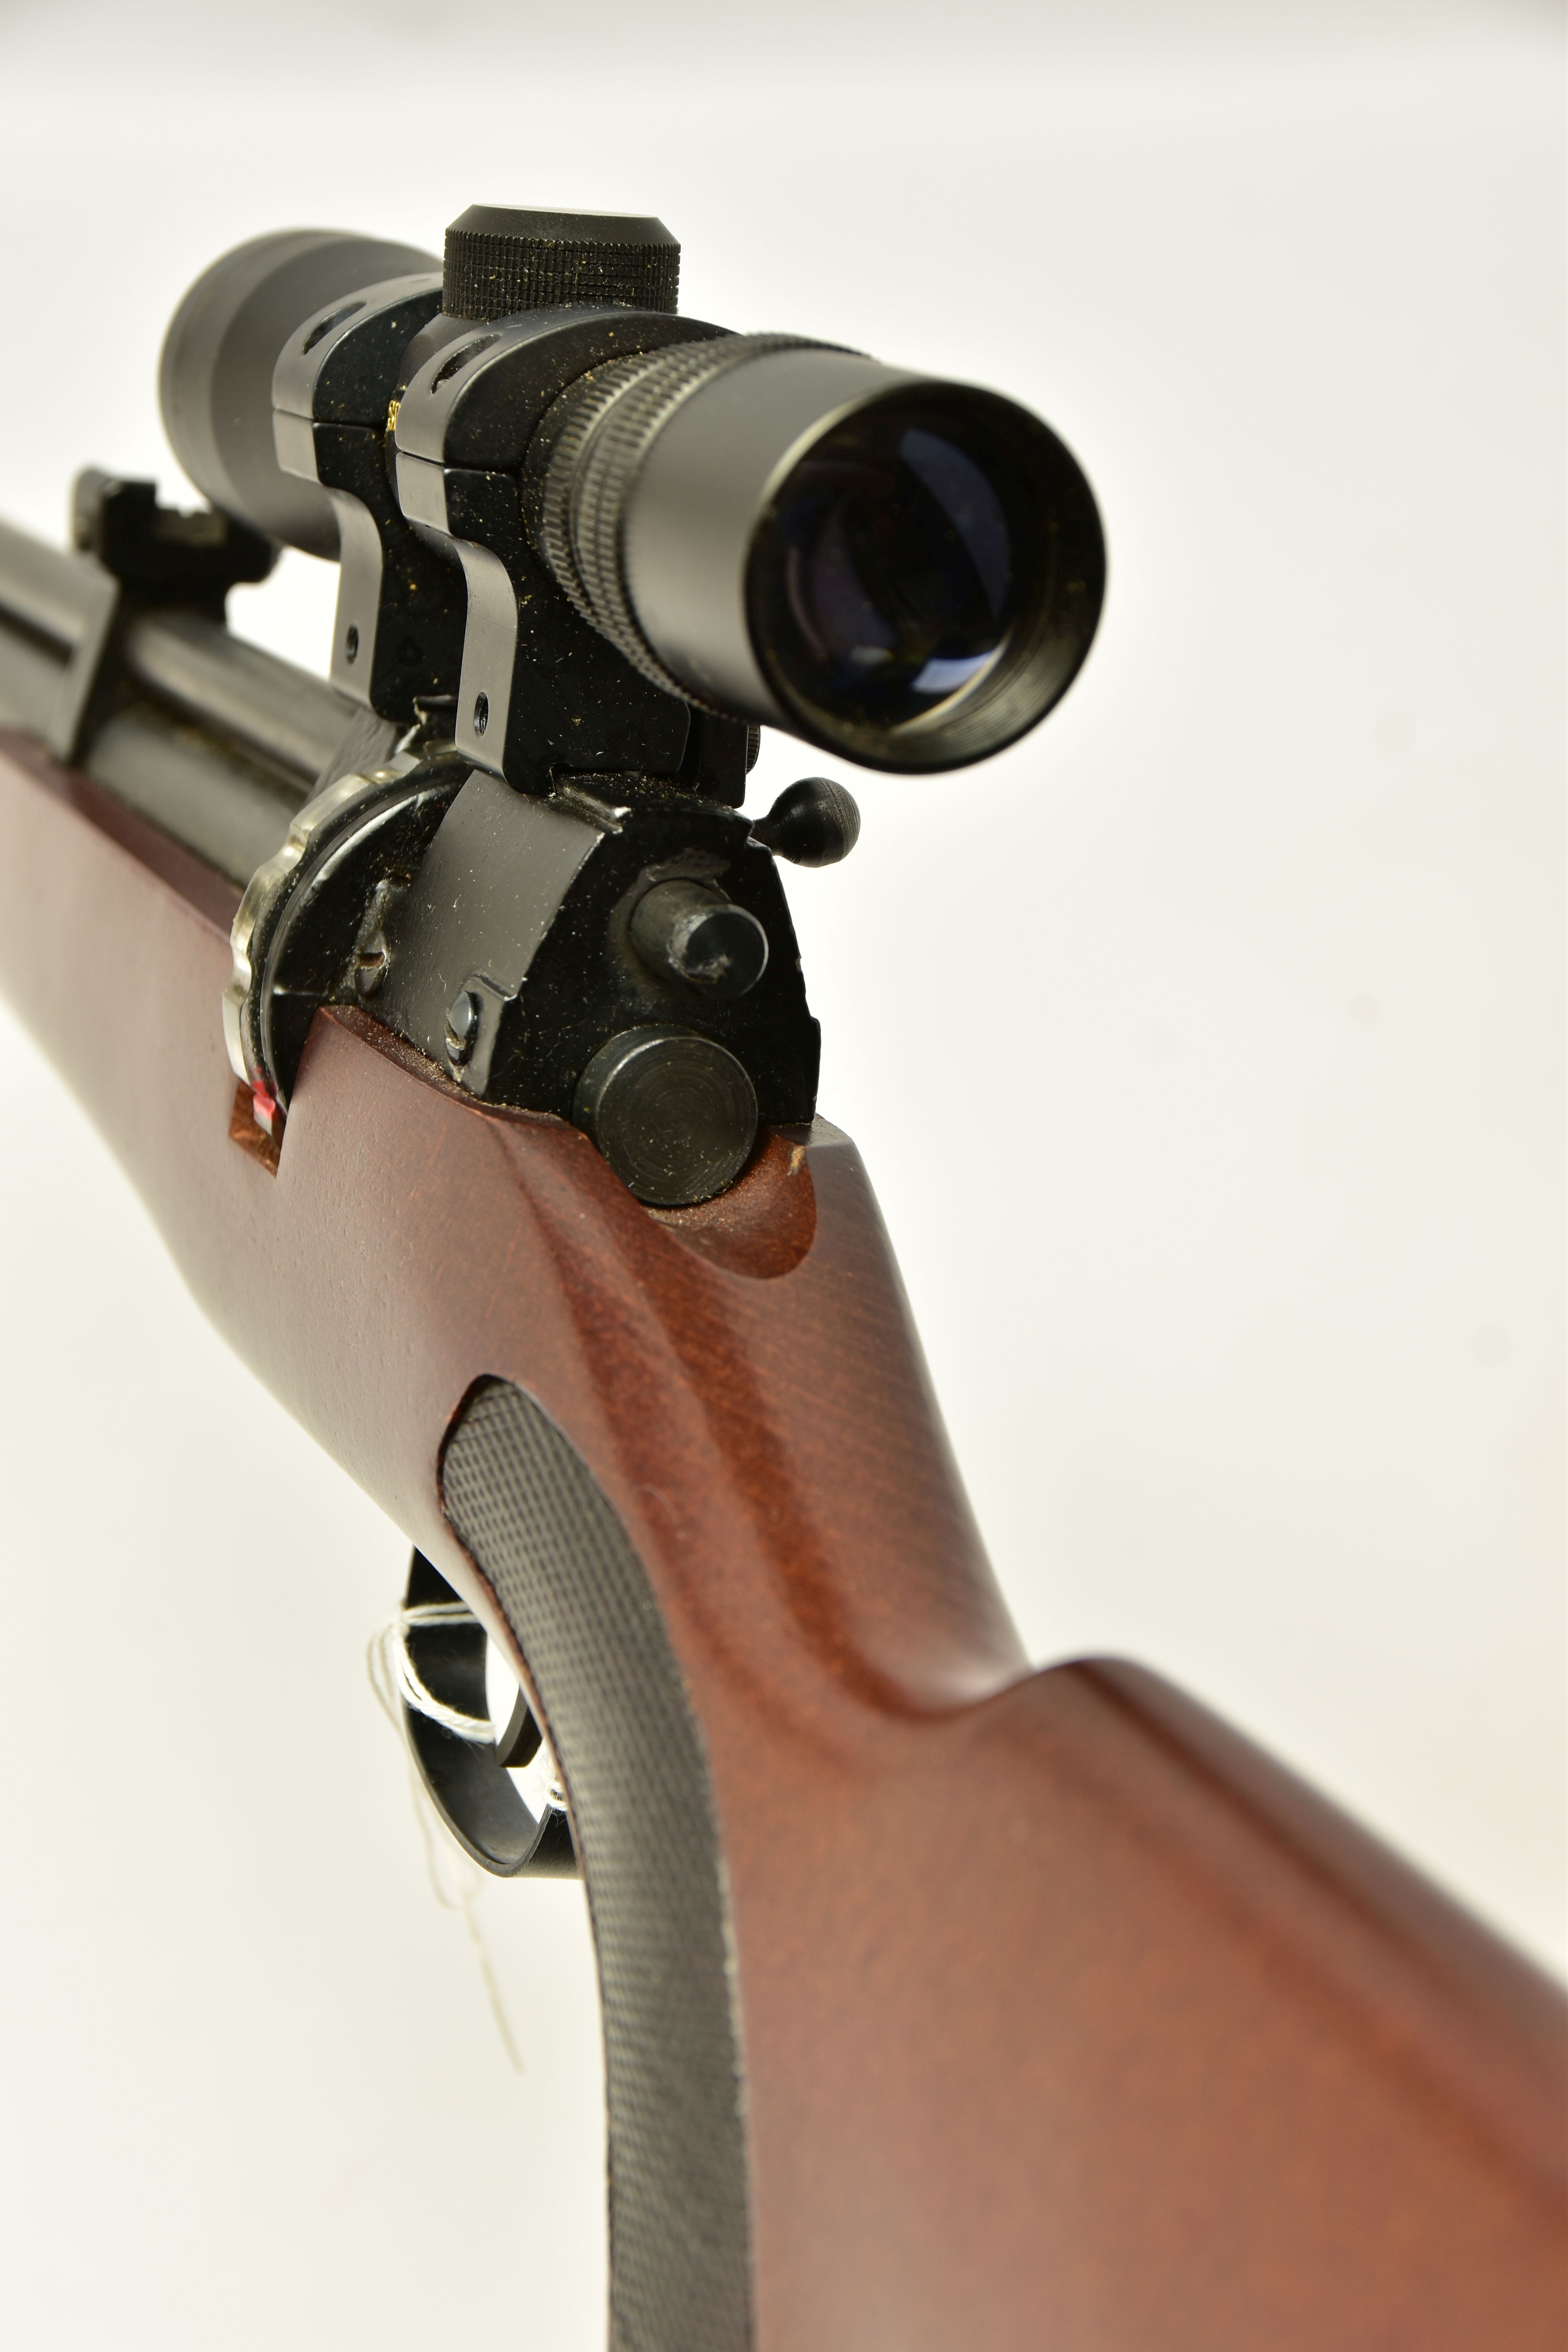 A .22 '' ROTARY MAGAZINE PUMP UP AIR RIFLE fitted with a beech stock, in working order and excellent - Image 8 of 9